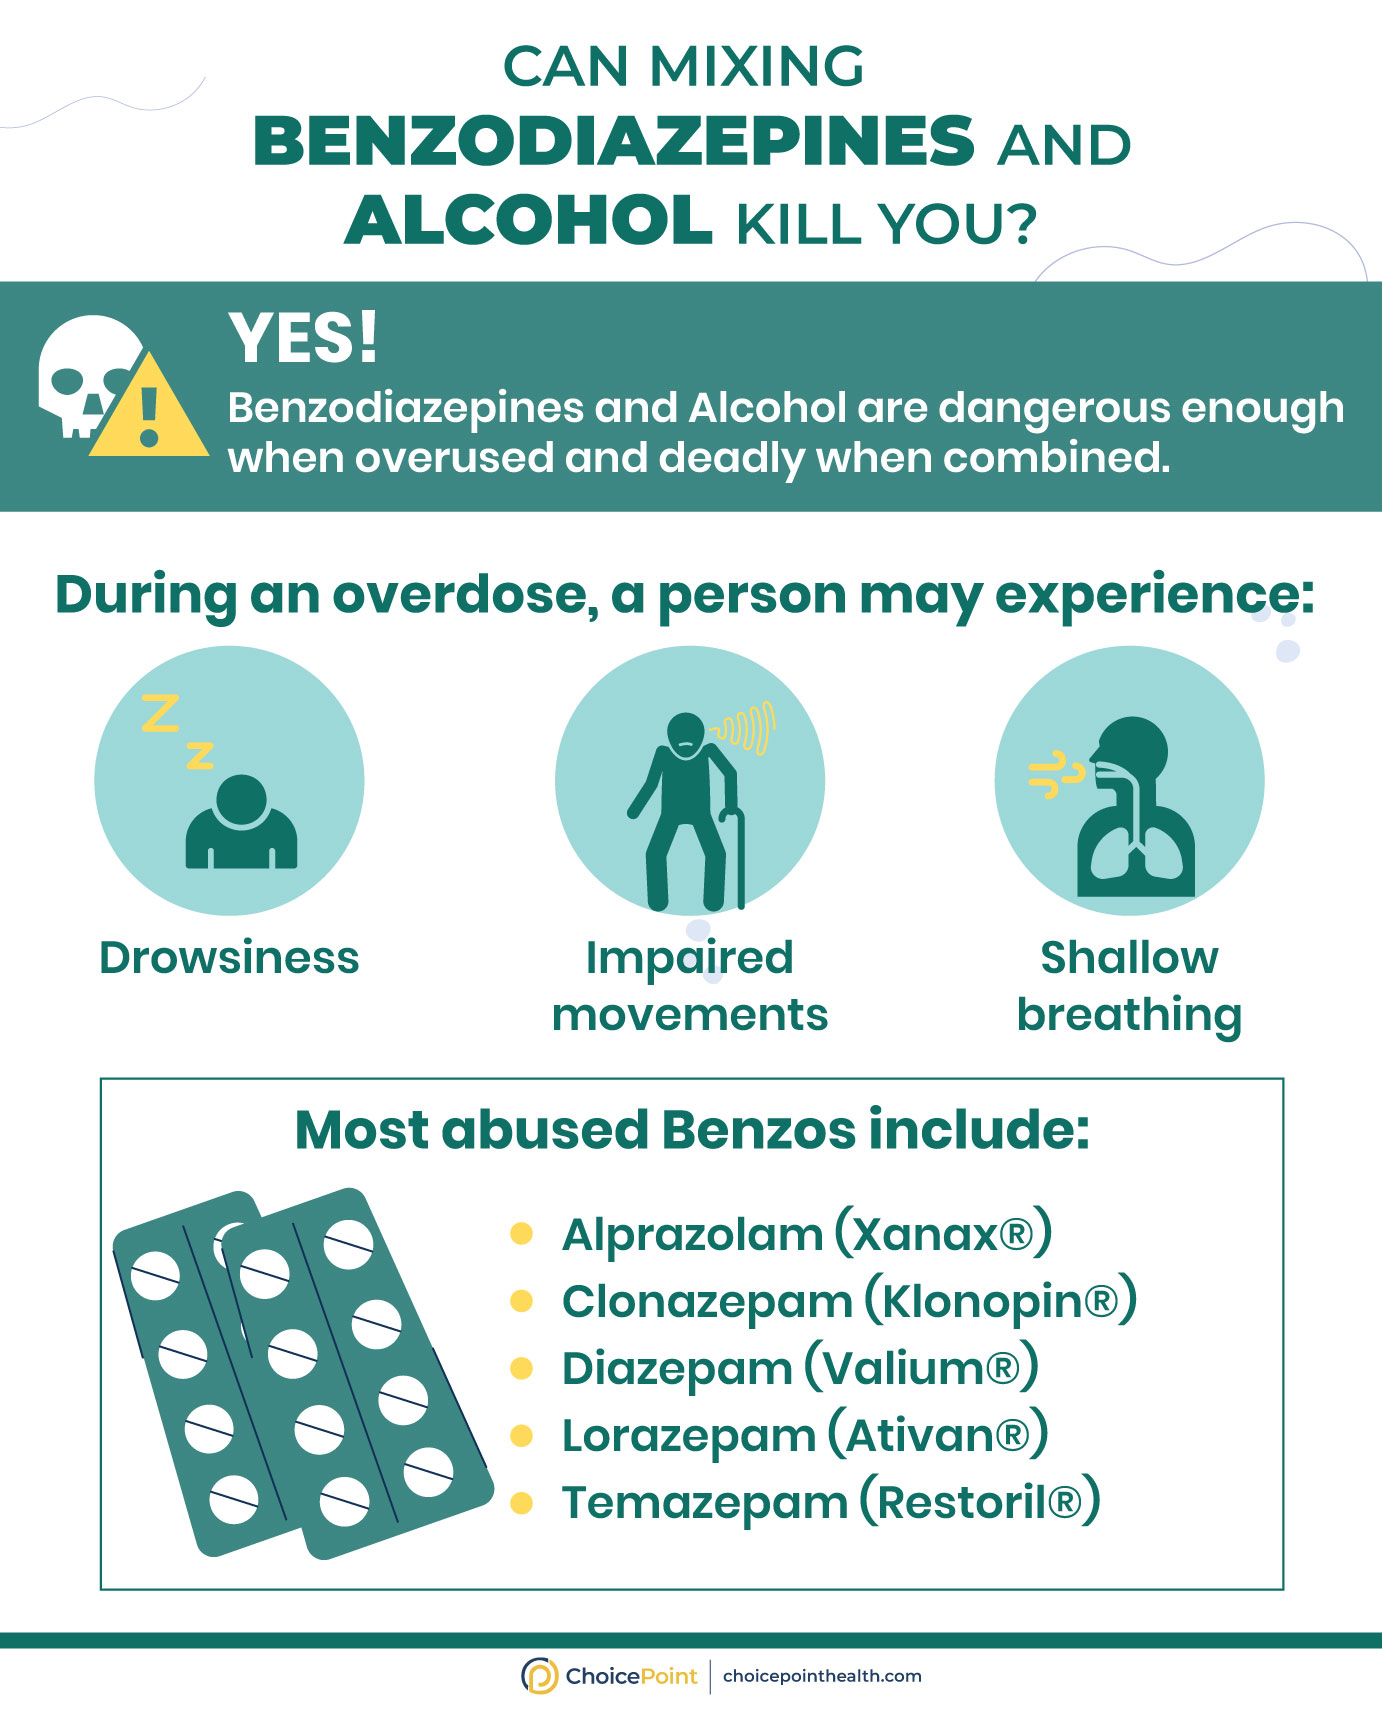 What Happens When You Mix Benzodiazepine and Alcohol?